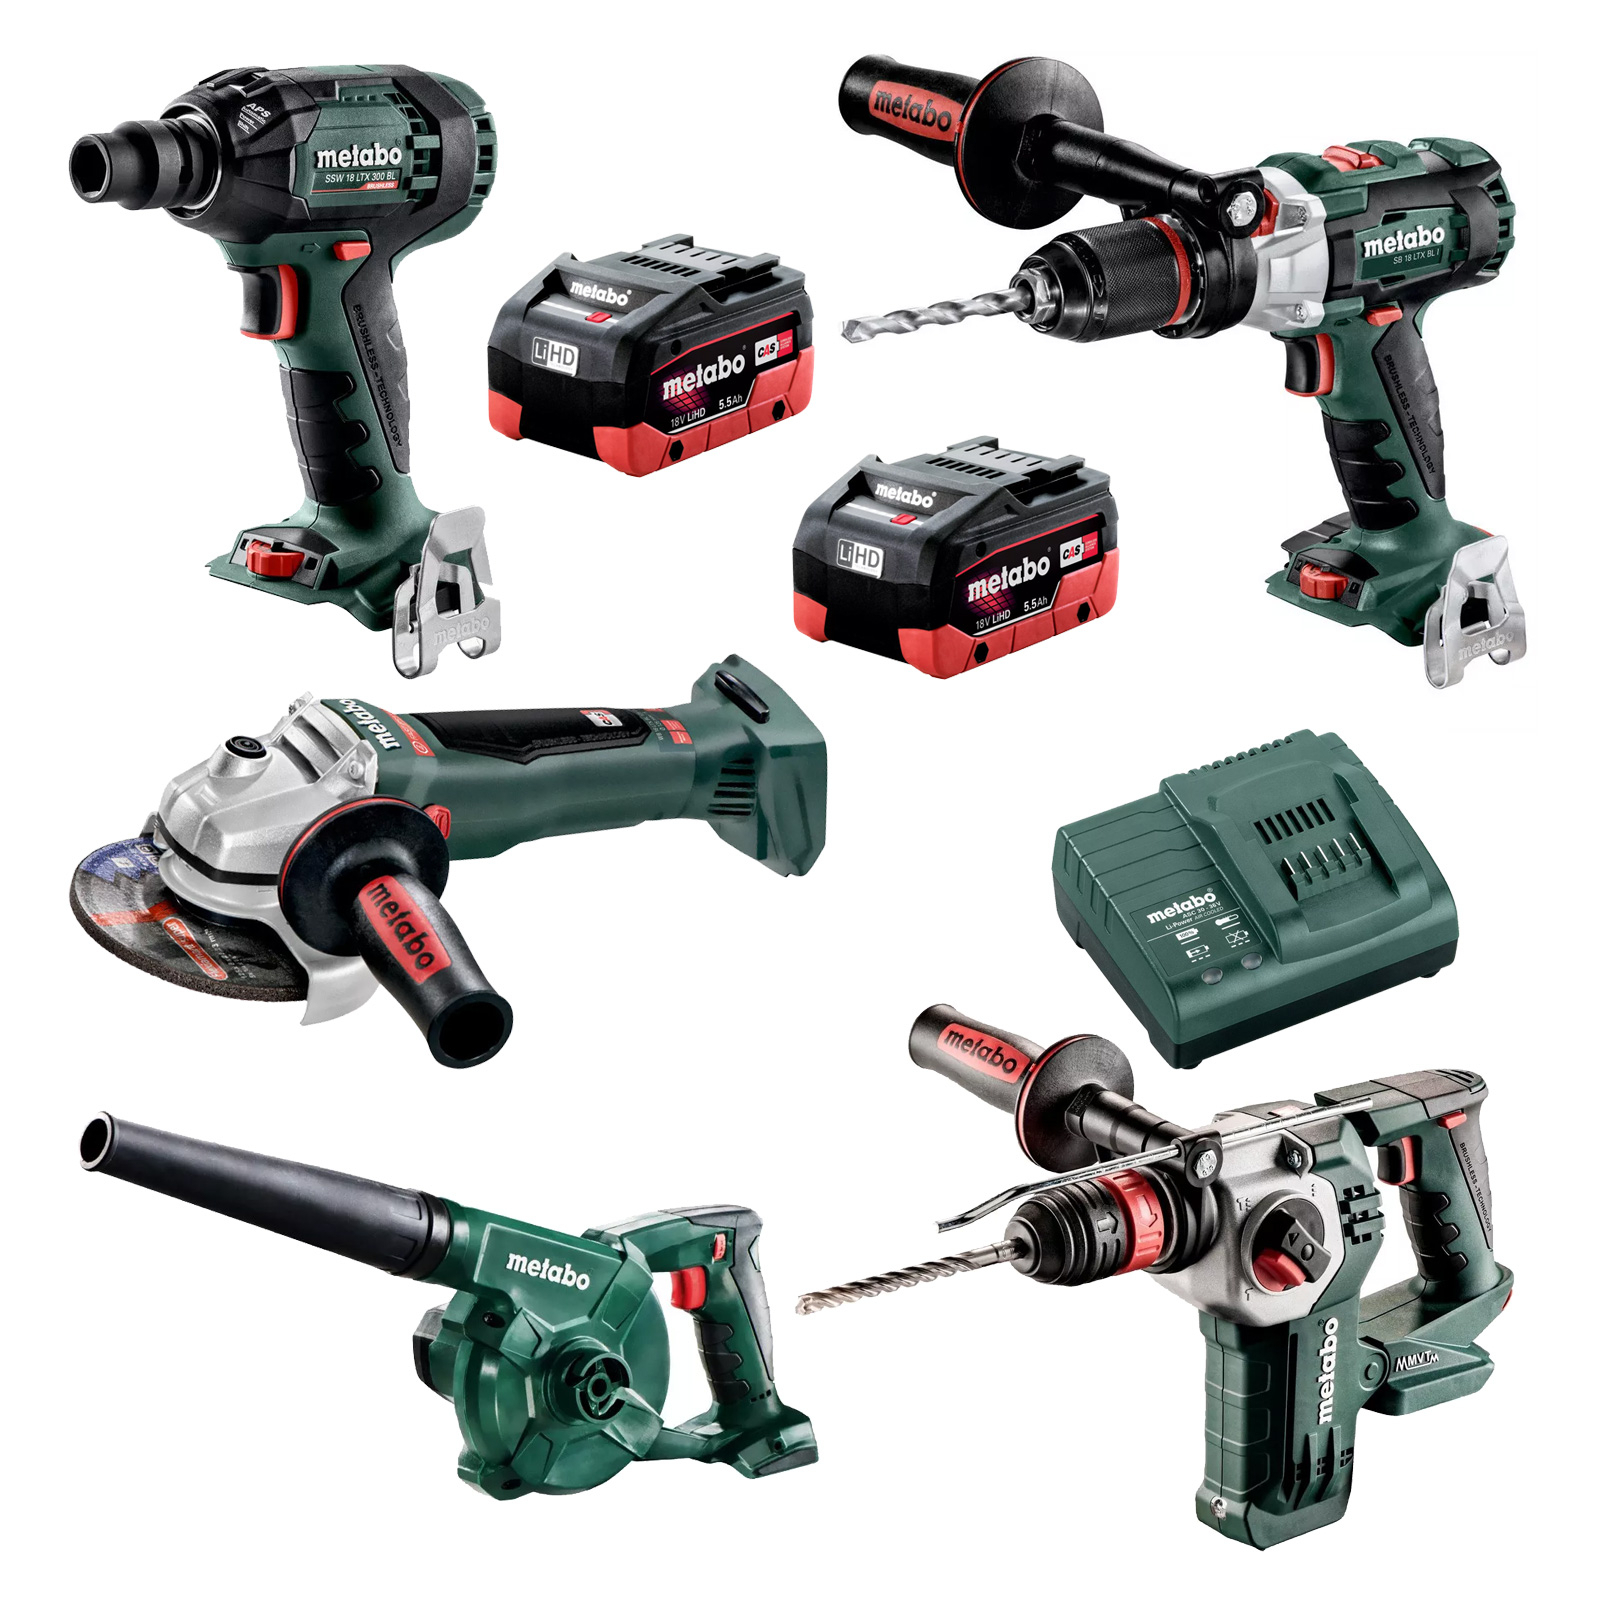 Metabo 18V 5 Piece Brushless LiHD Combo